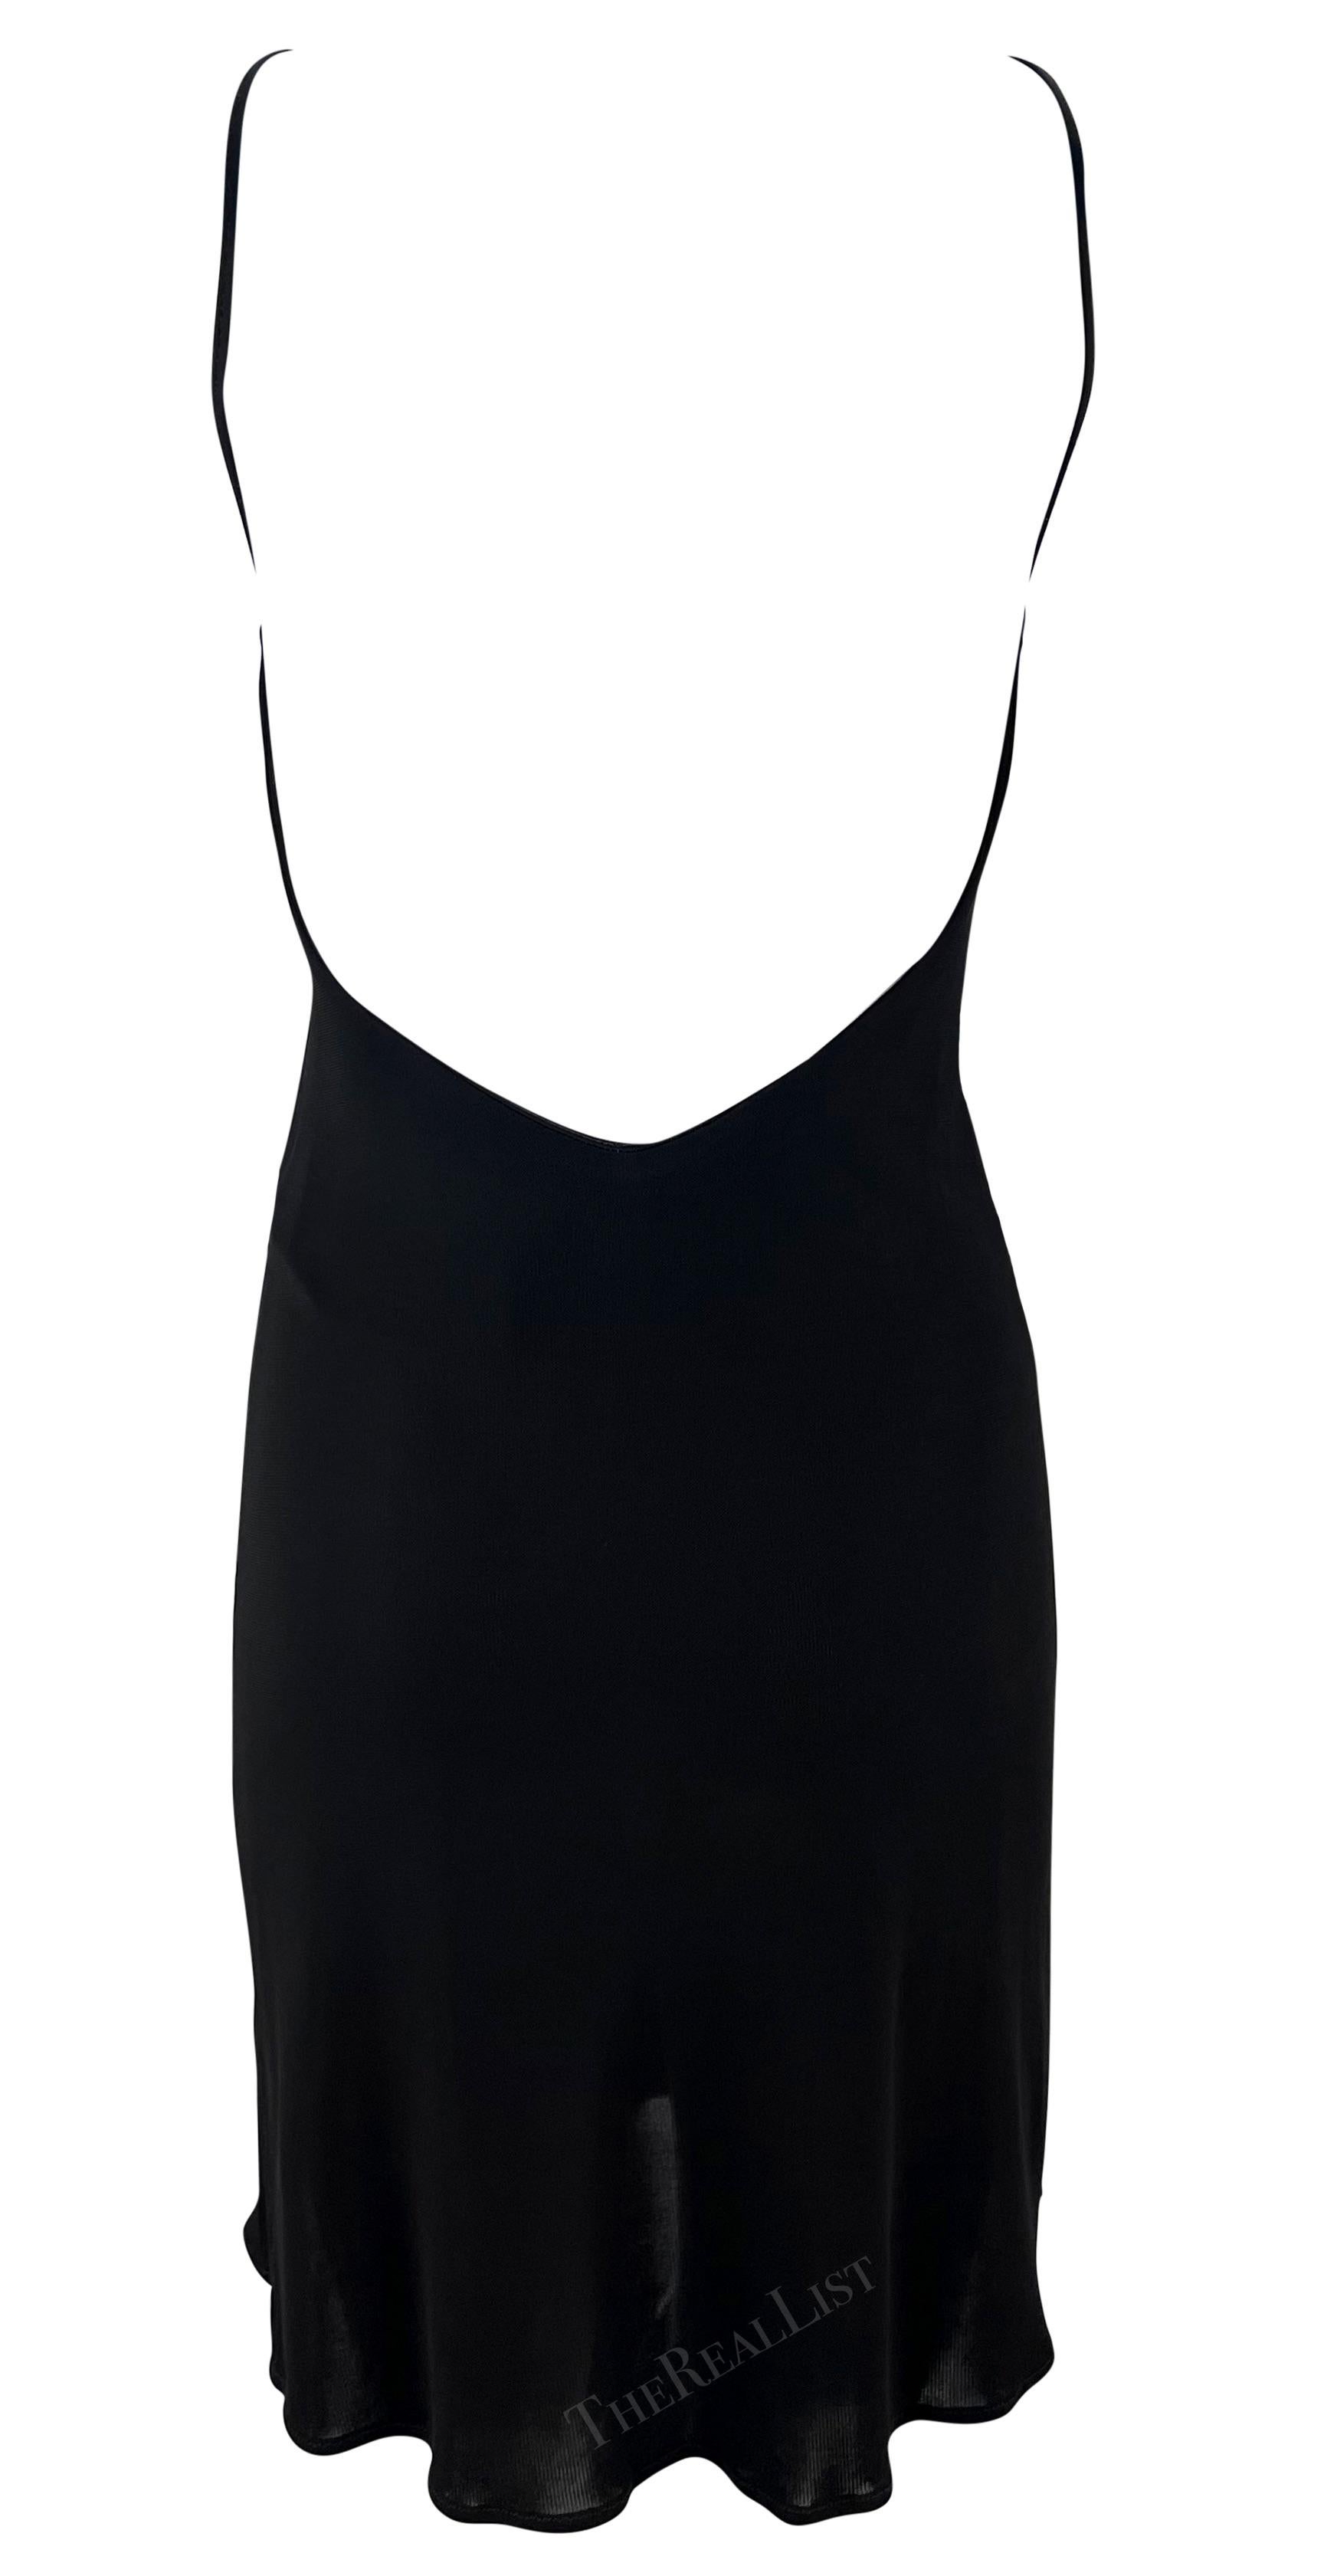 Presenting a chic black knit Yigal Azrouël mini dress. From the late 1990s, this mini dress features a bandeau neckline, spaghetti strap, and an exposed back. The dress is made complete with a lightly flared hem and a small slit on either side.